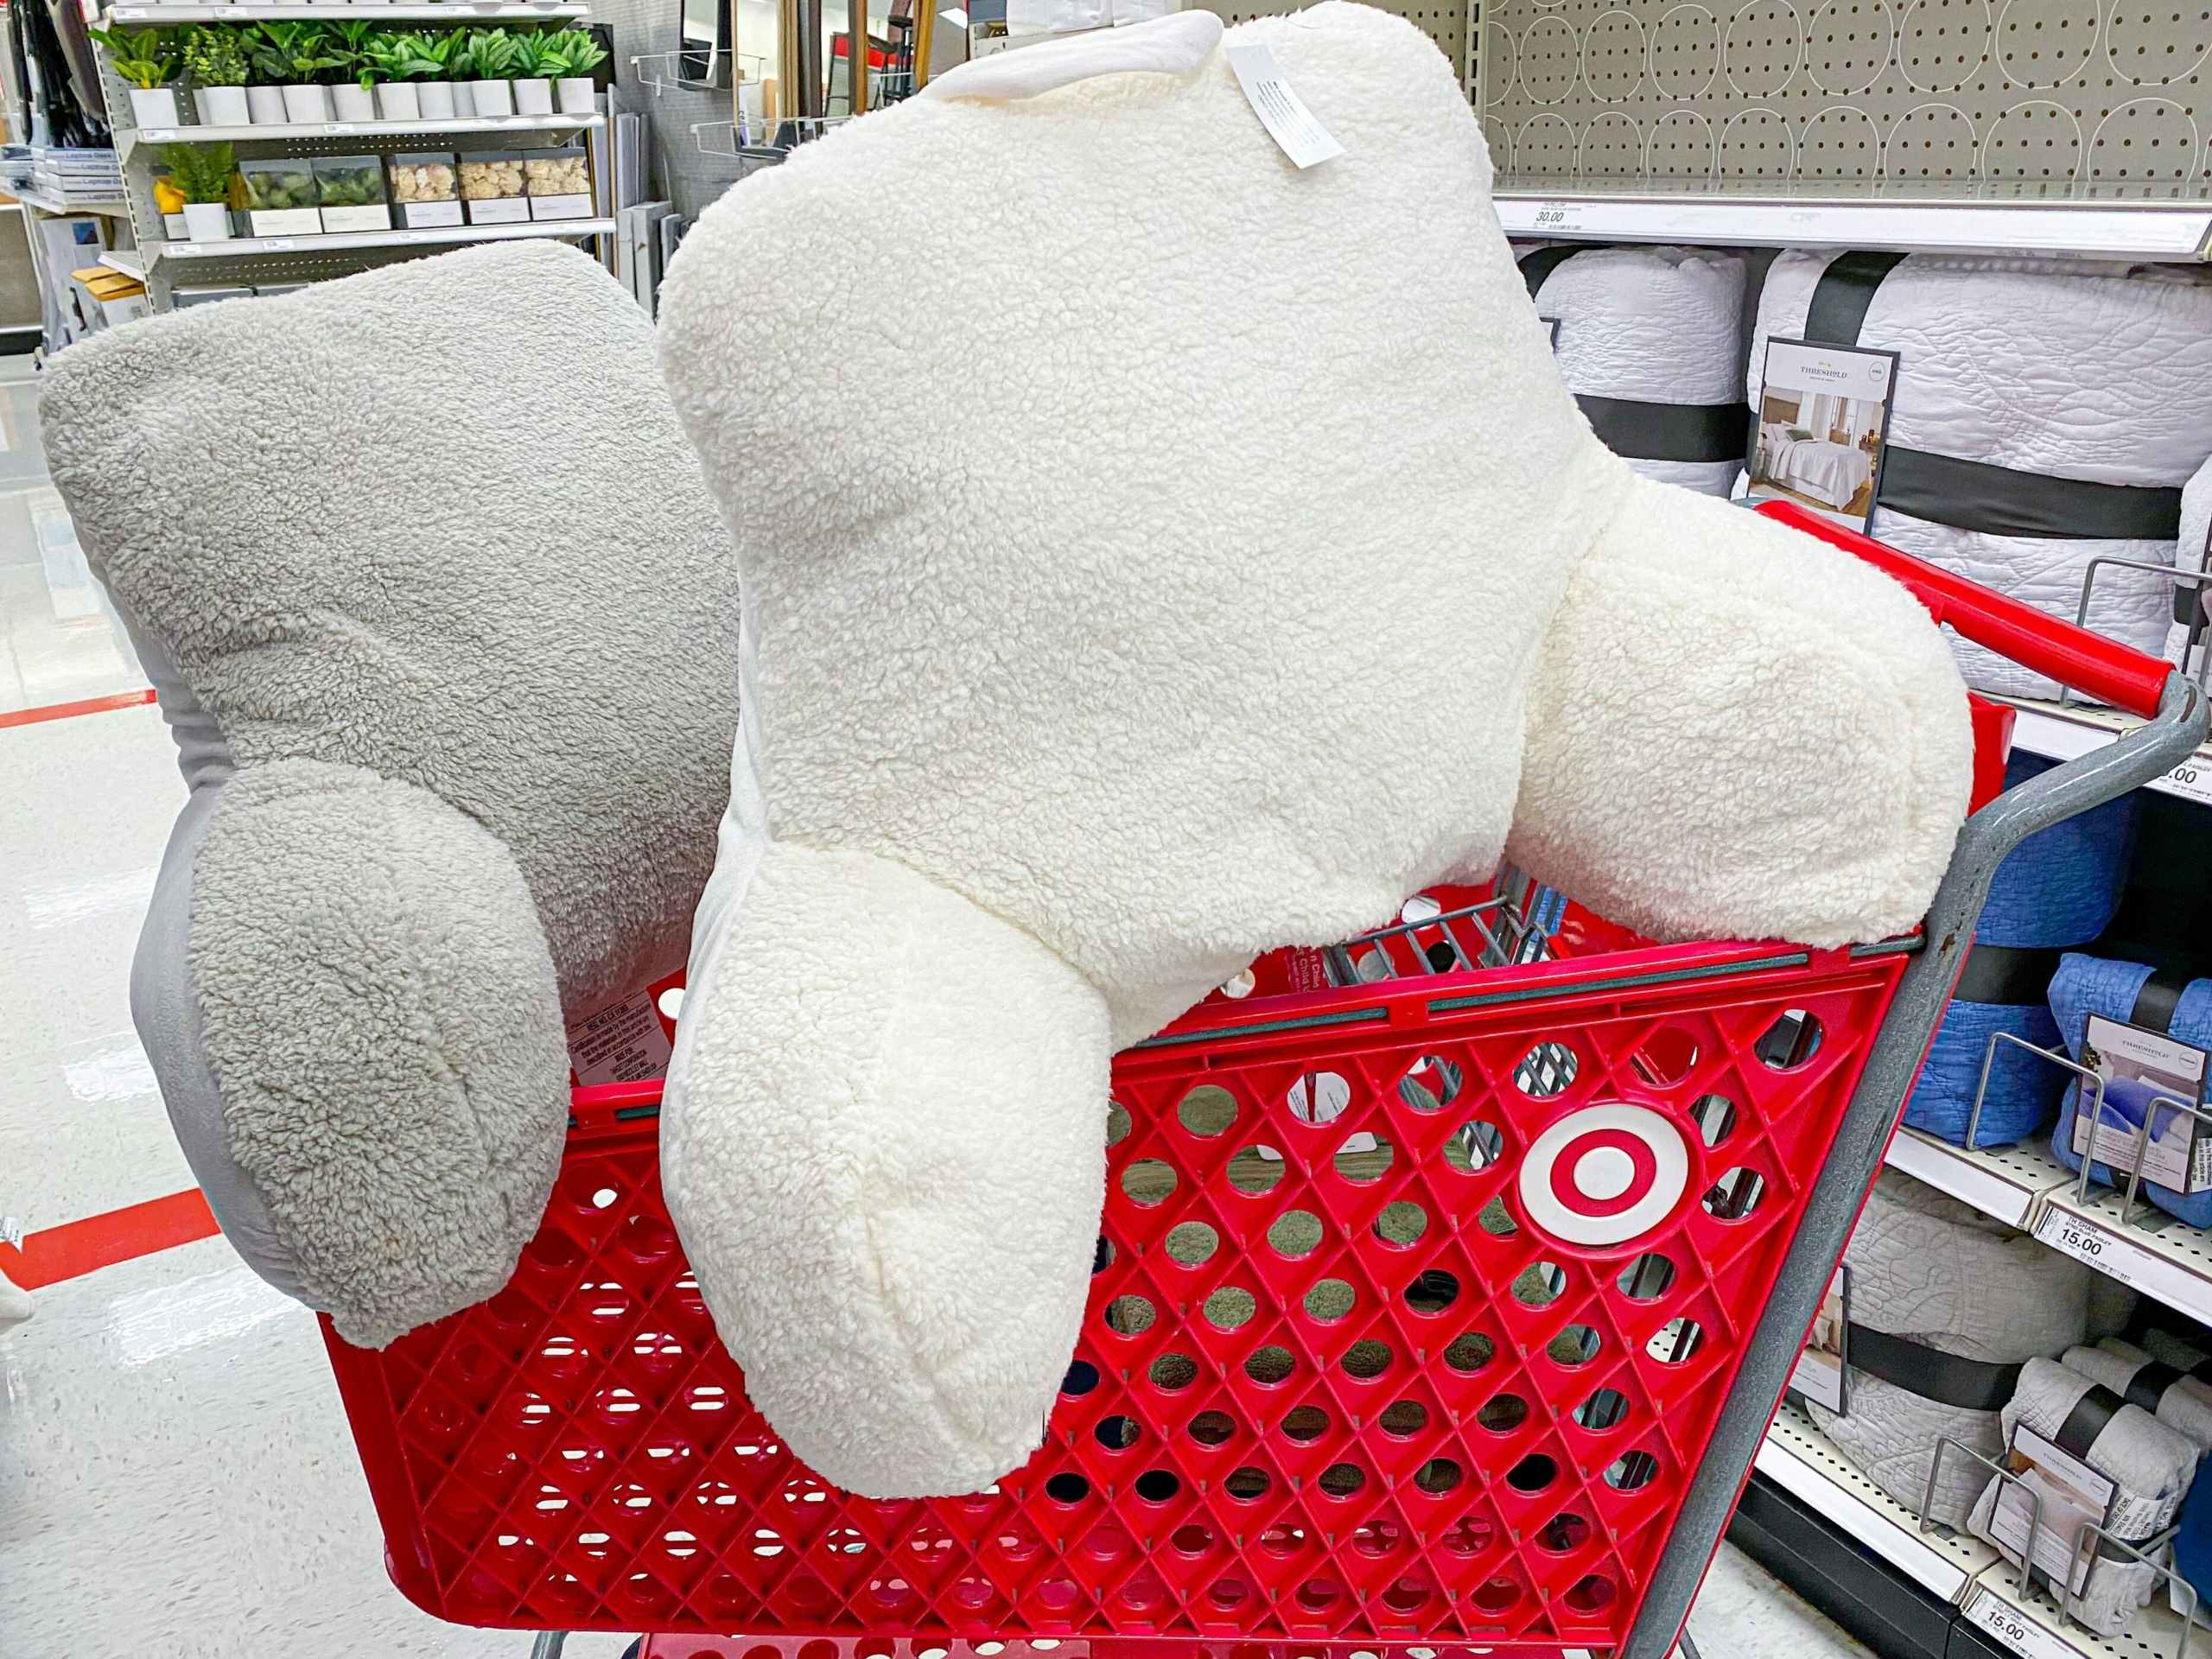 Two Room Essentials sherpa bed rest pillows on top of a Target shopping cart in an aisle at Target.